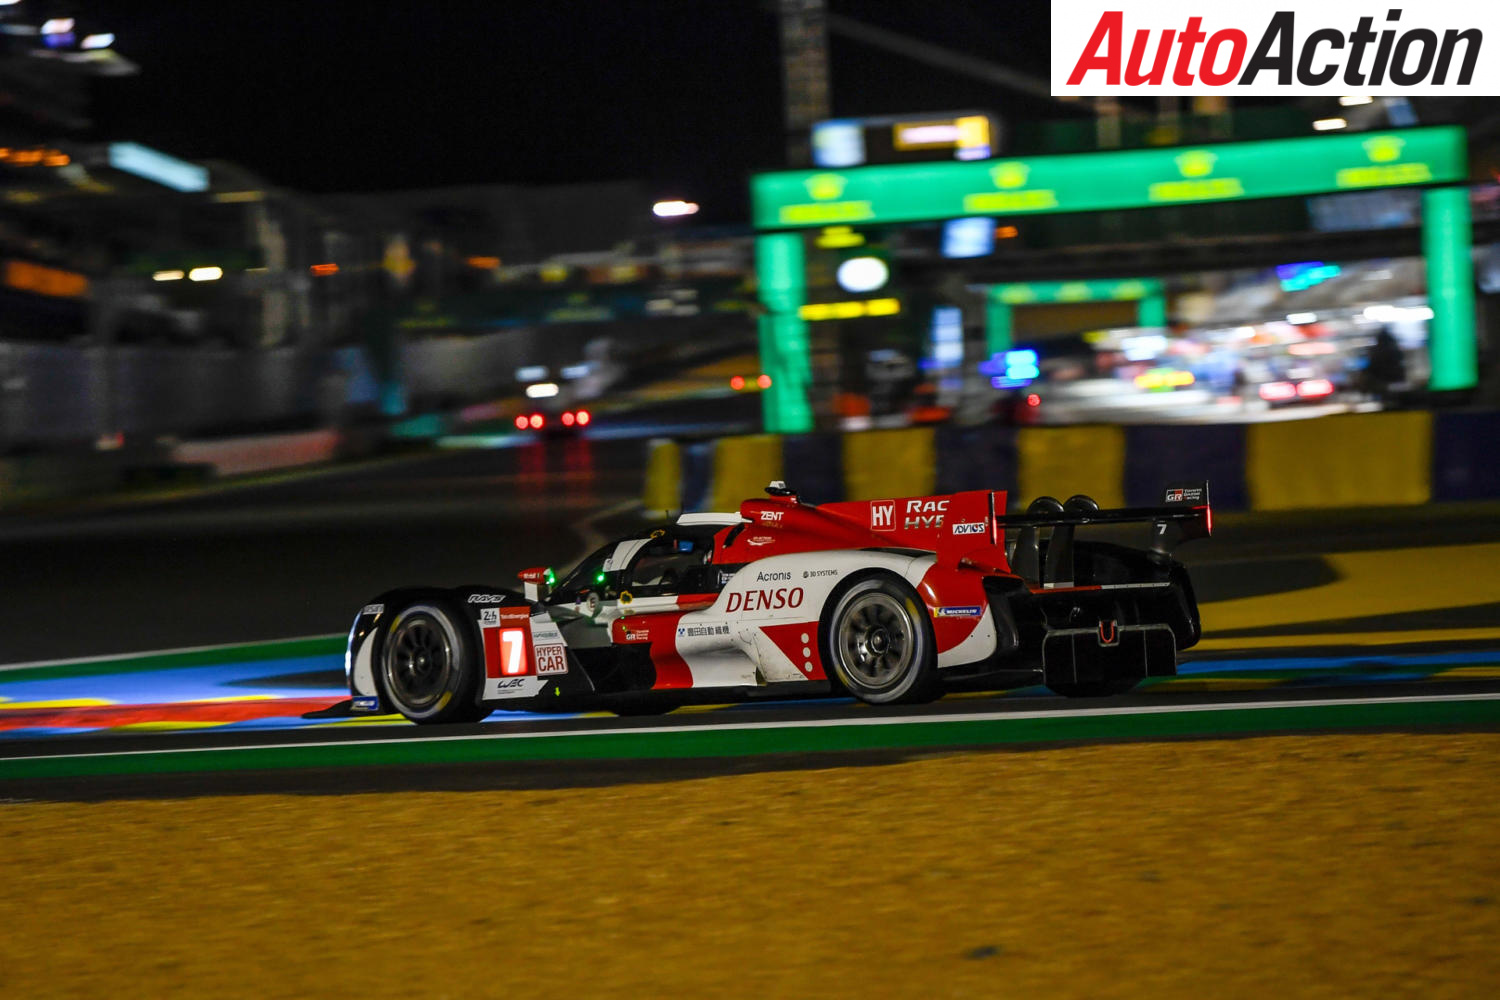 Toyota locks out Le Mans 24 Hour front row - Image: Motorsport Images